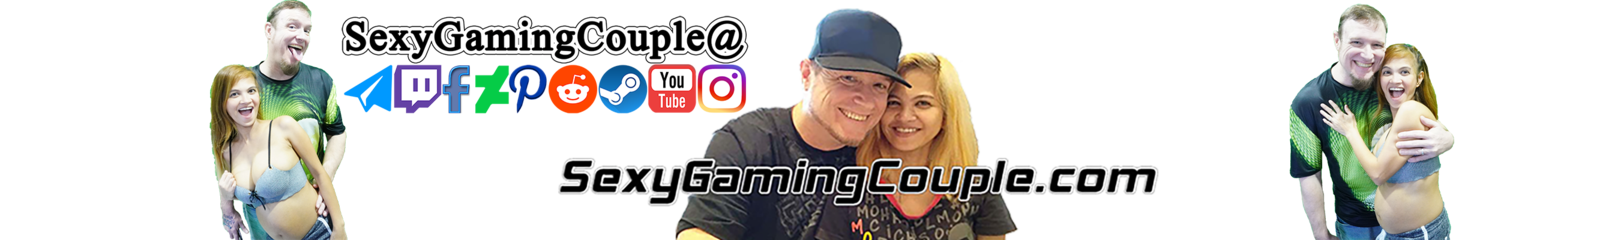 Sexy gaming couple